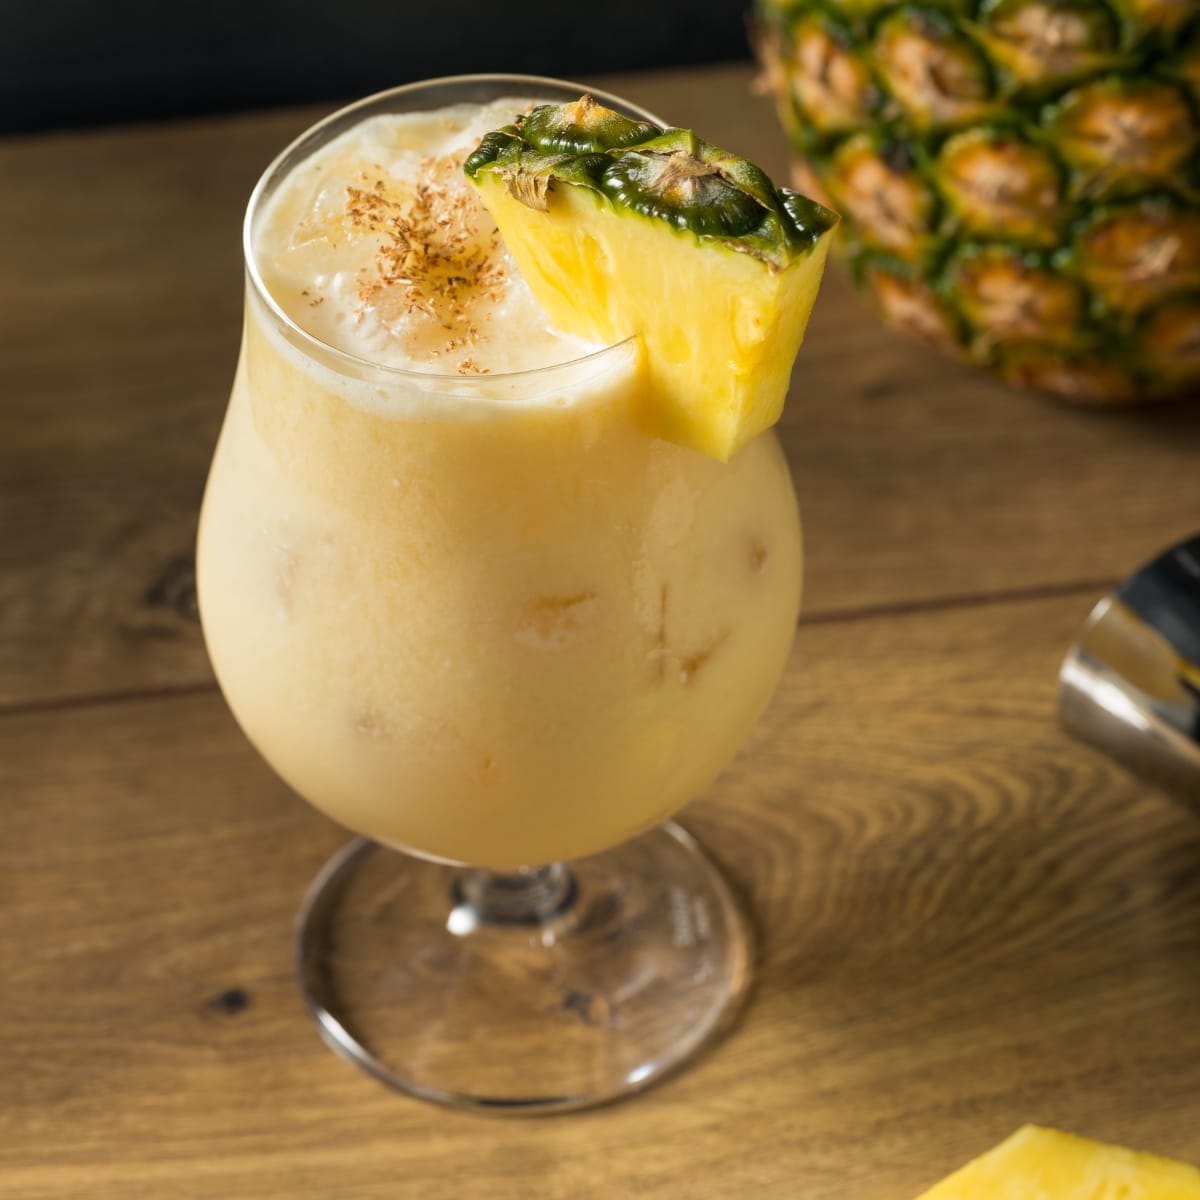 Top view of a glass of Painkiller Cocktail,  garnished with a slice of fresh pineapple and nutmeg powder